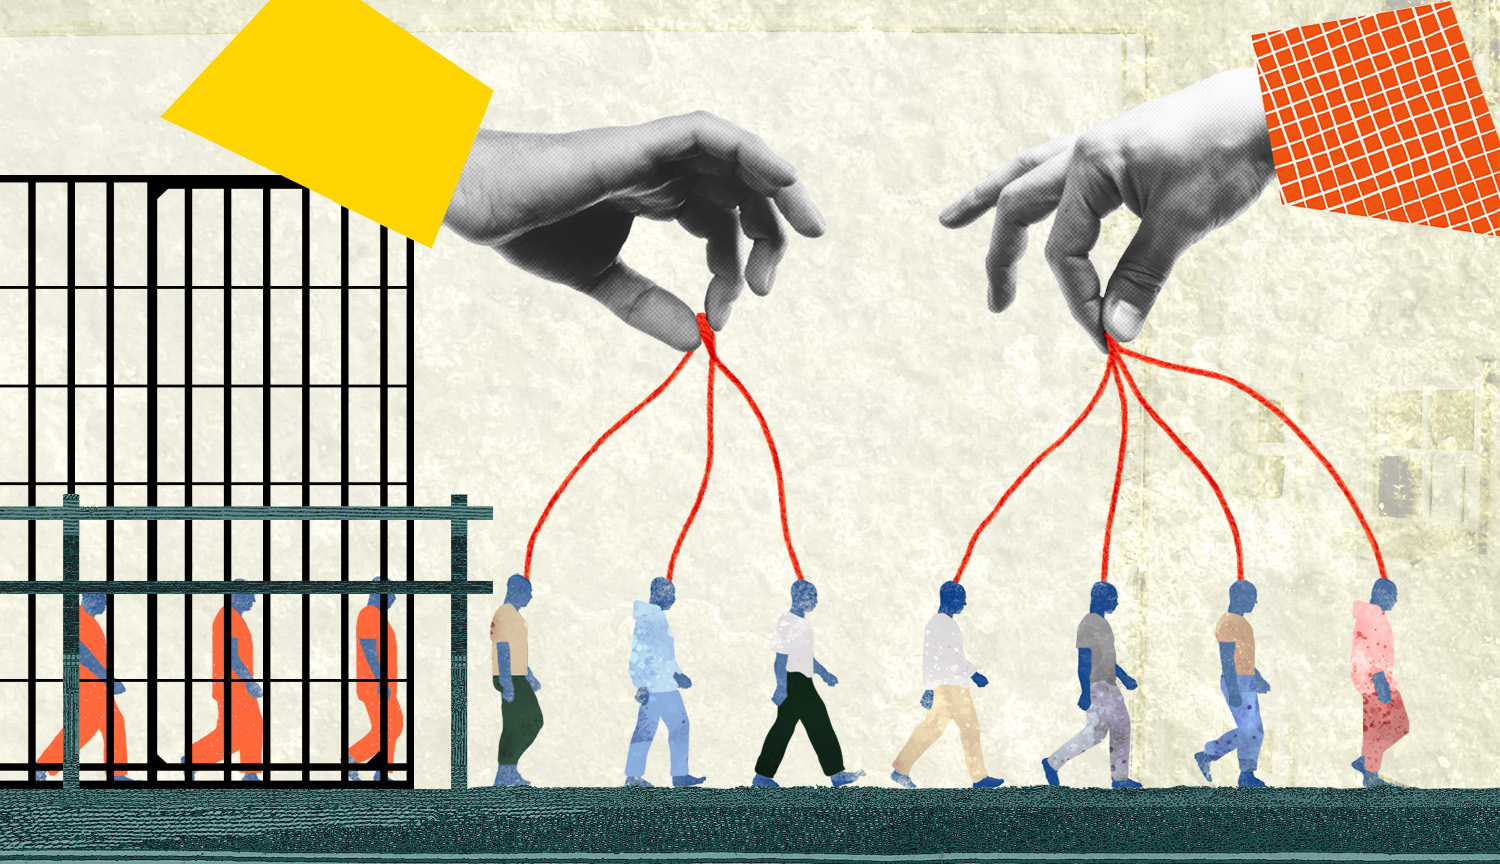 Illustration shows a line of prisoners walking out of a cage. Once they leave, strings connect each convict to overhead hands, reflecting continued supervision on parole and probation.